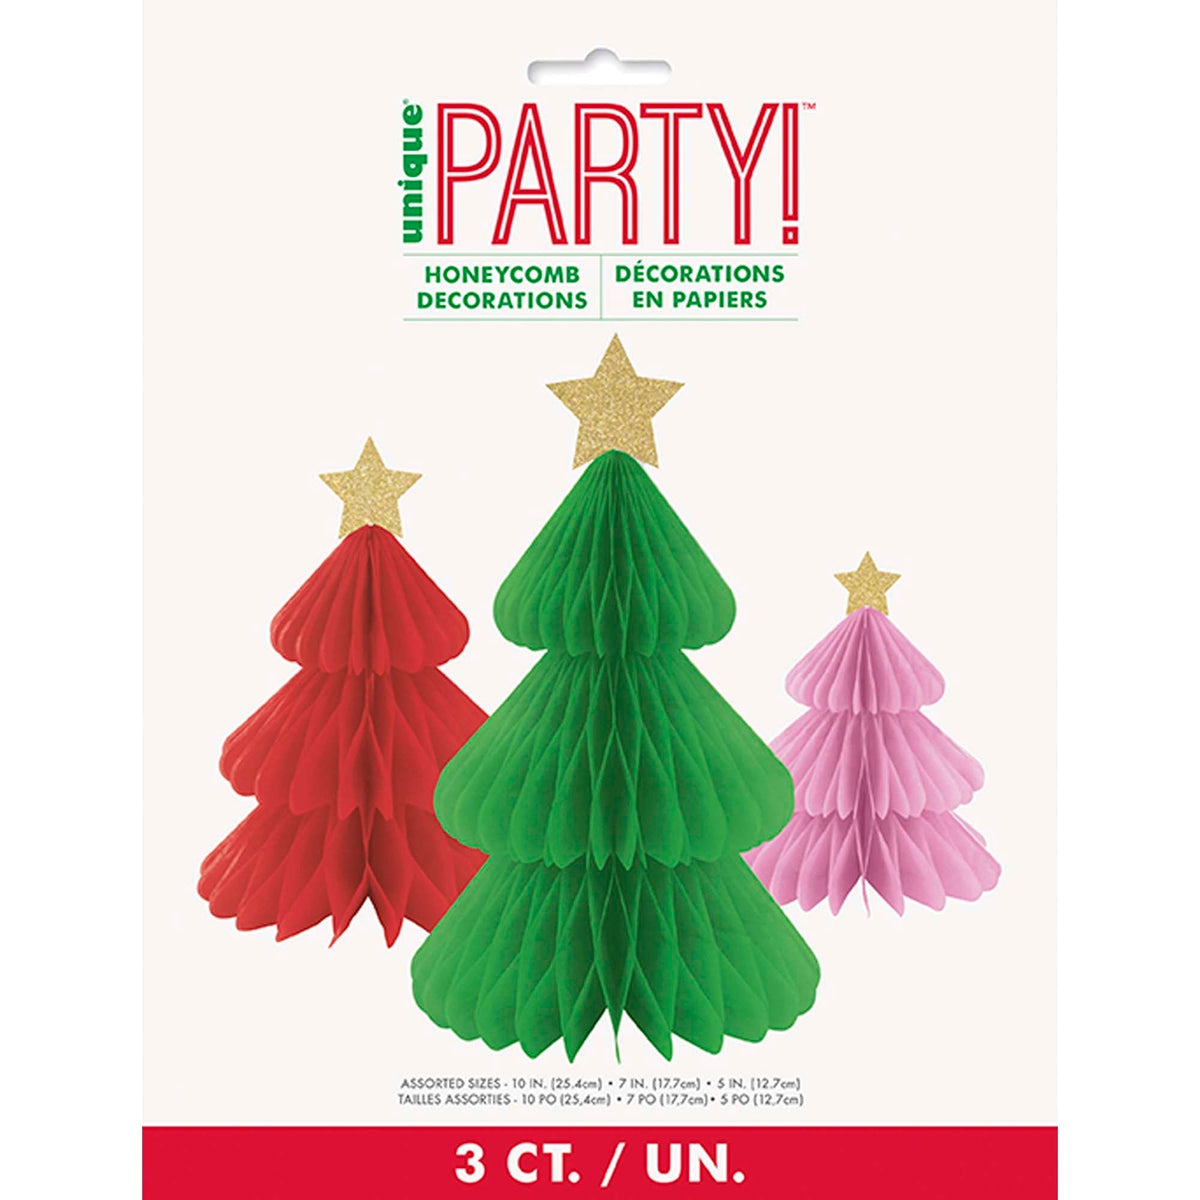 UNIQUE PARTY FAVORS Christmas Vibrant Christmas Trees Honeycomb Decorations, Green, Red, Pink, 1 Count